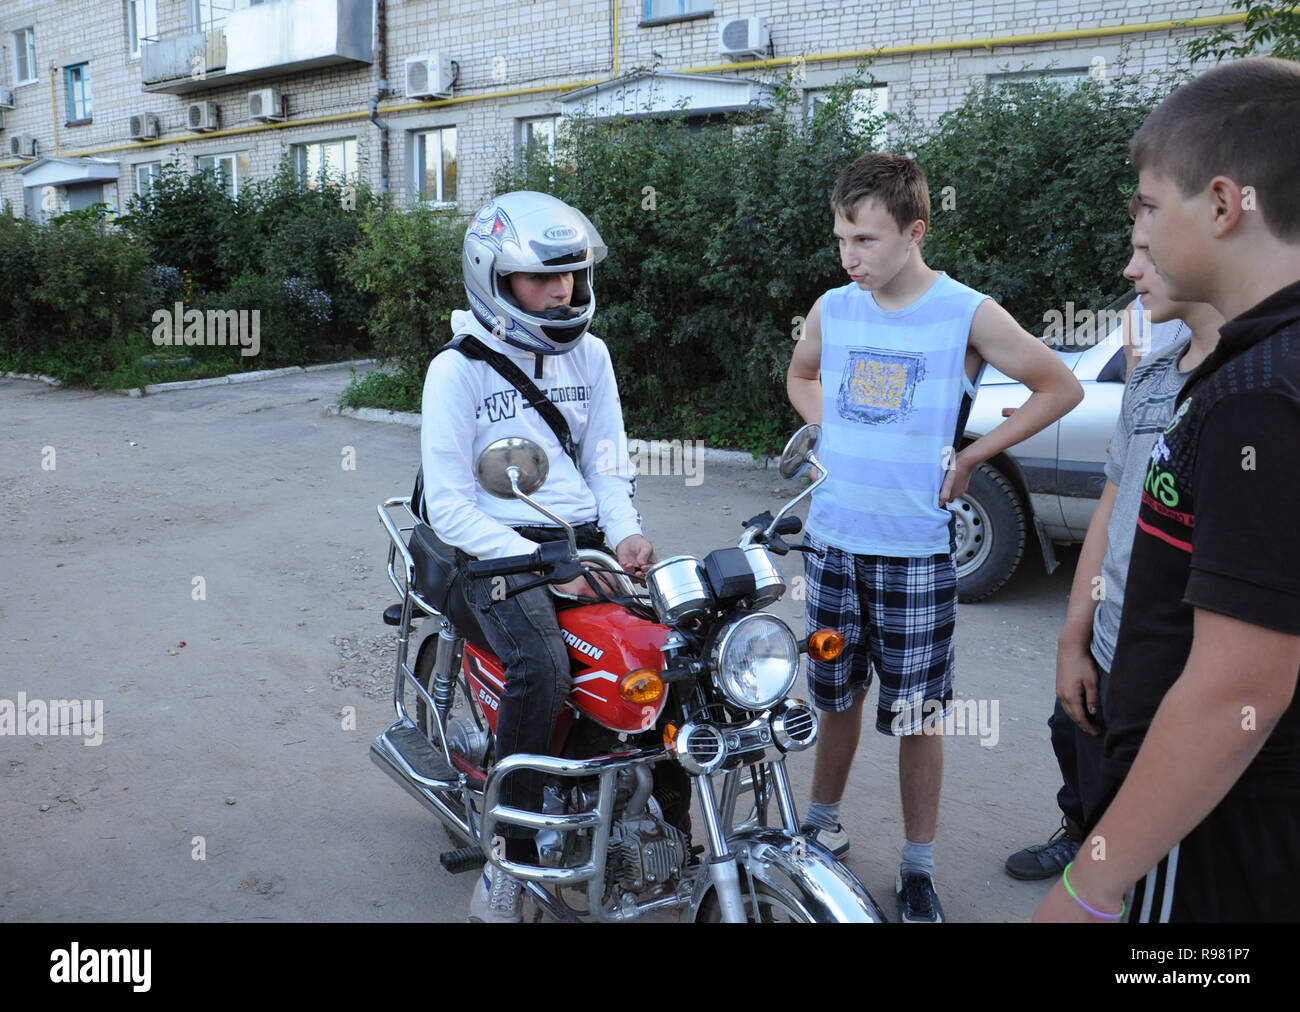 Kovrov, Russia. 18 August 2013. Teens communicate to his friend who are riding a motorcycle Orion in the courtyard of a multi-storey residential build Stock Photo